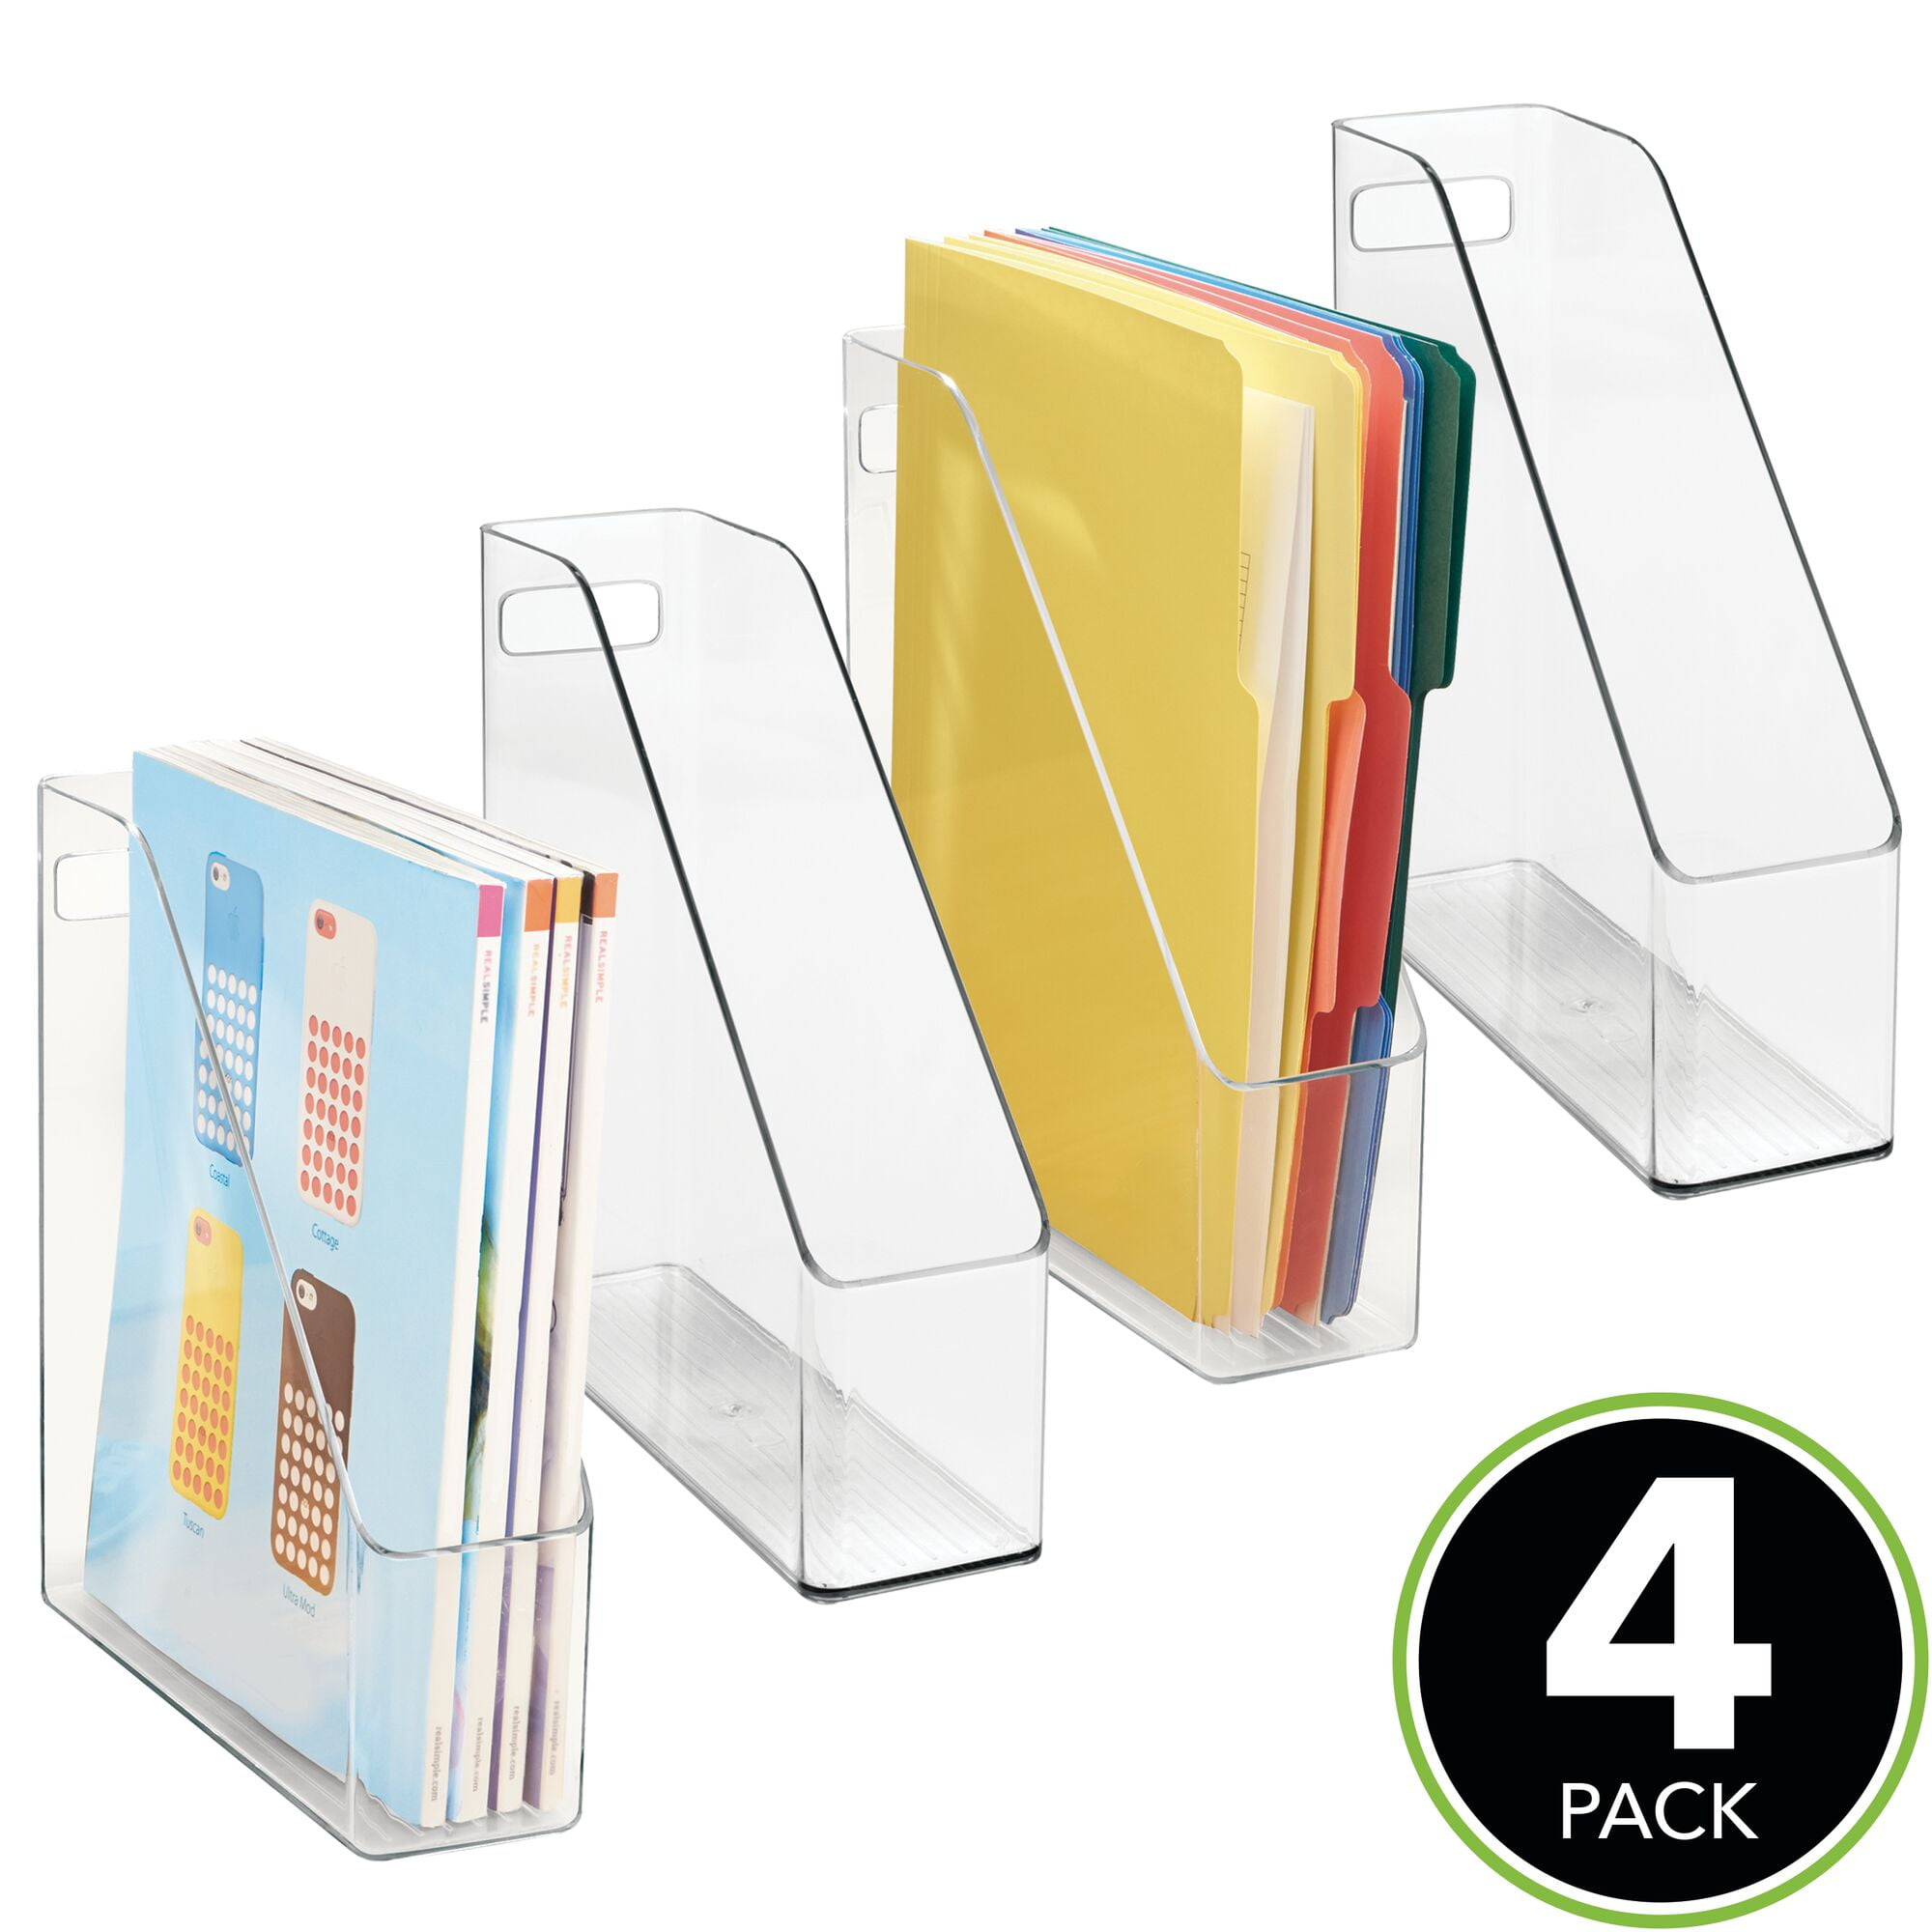 Clear Envelopes 4 Pack Vertical with Handle Holds Notebooks Magazines Binders Container for Home Office and Work Desktops mDesign Plastic Sturdy File Folder Bin Storage Organizer 